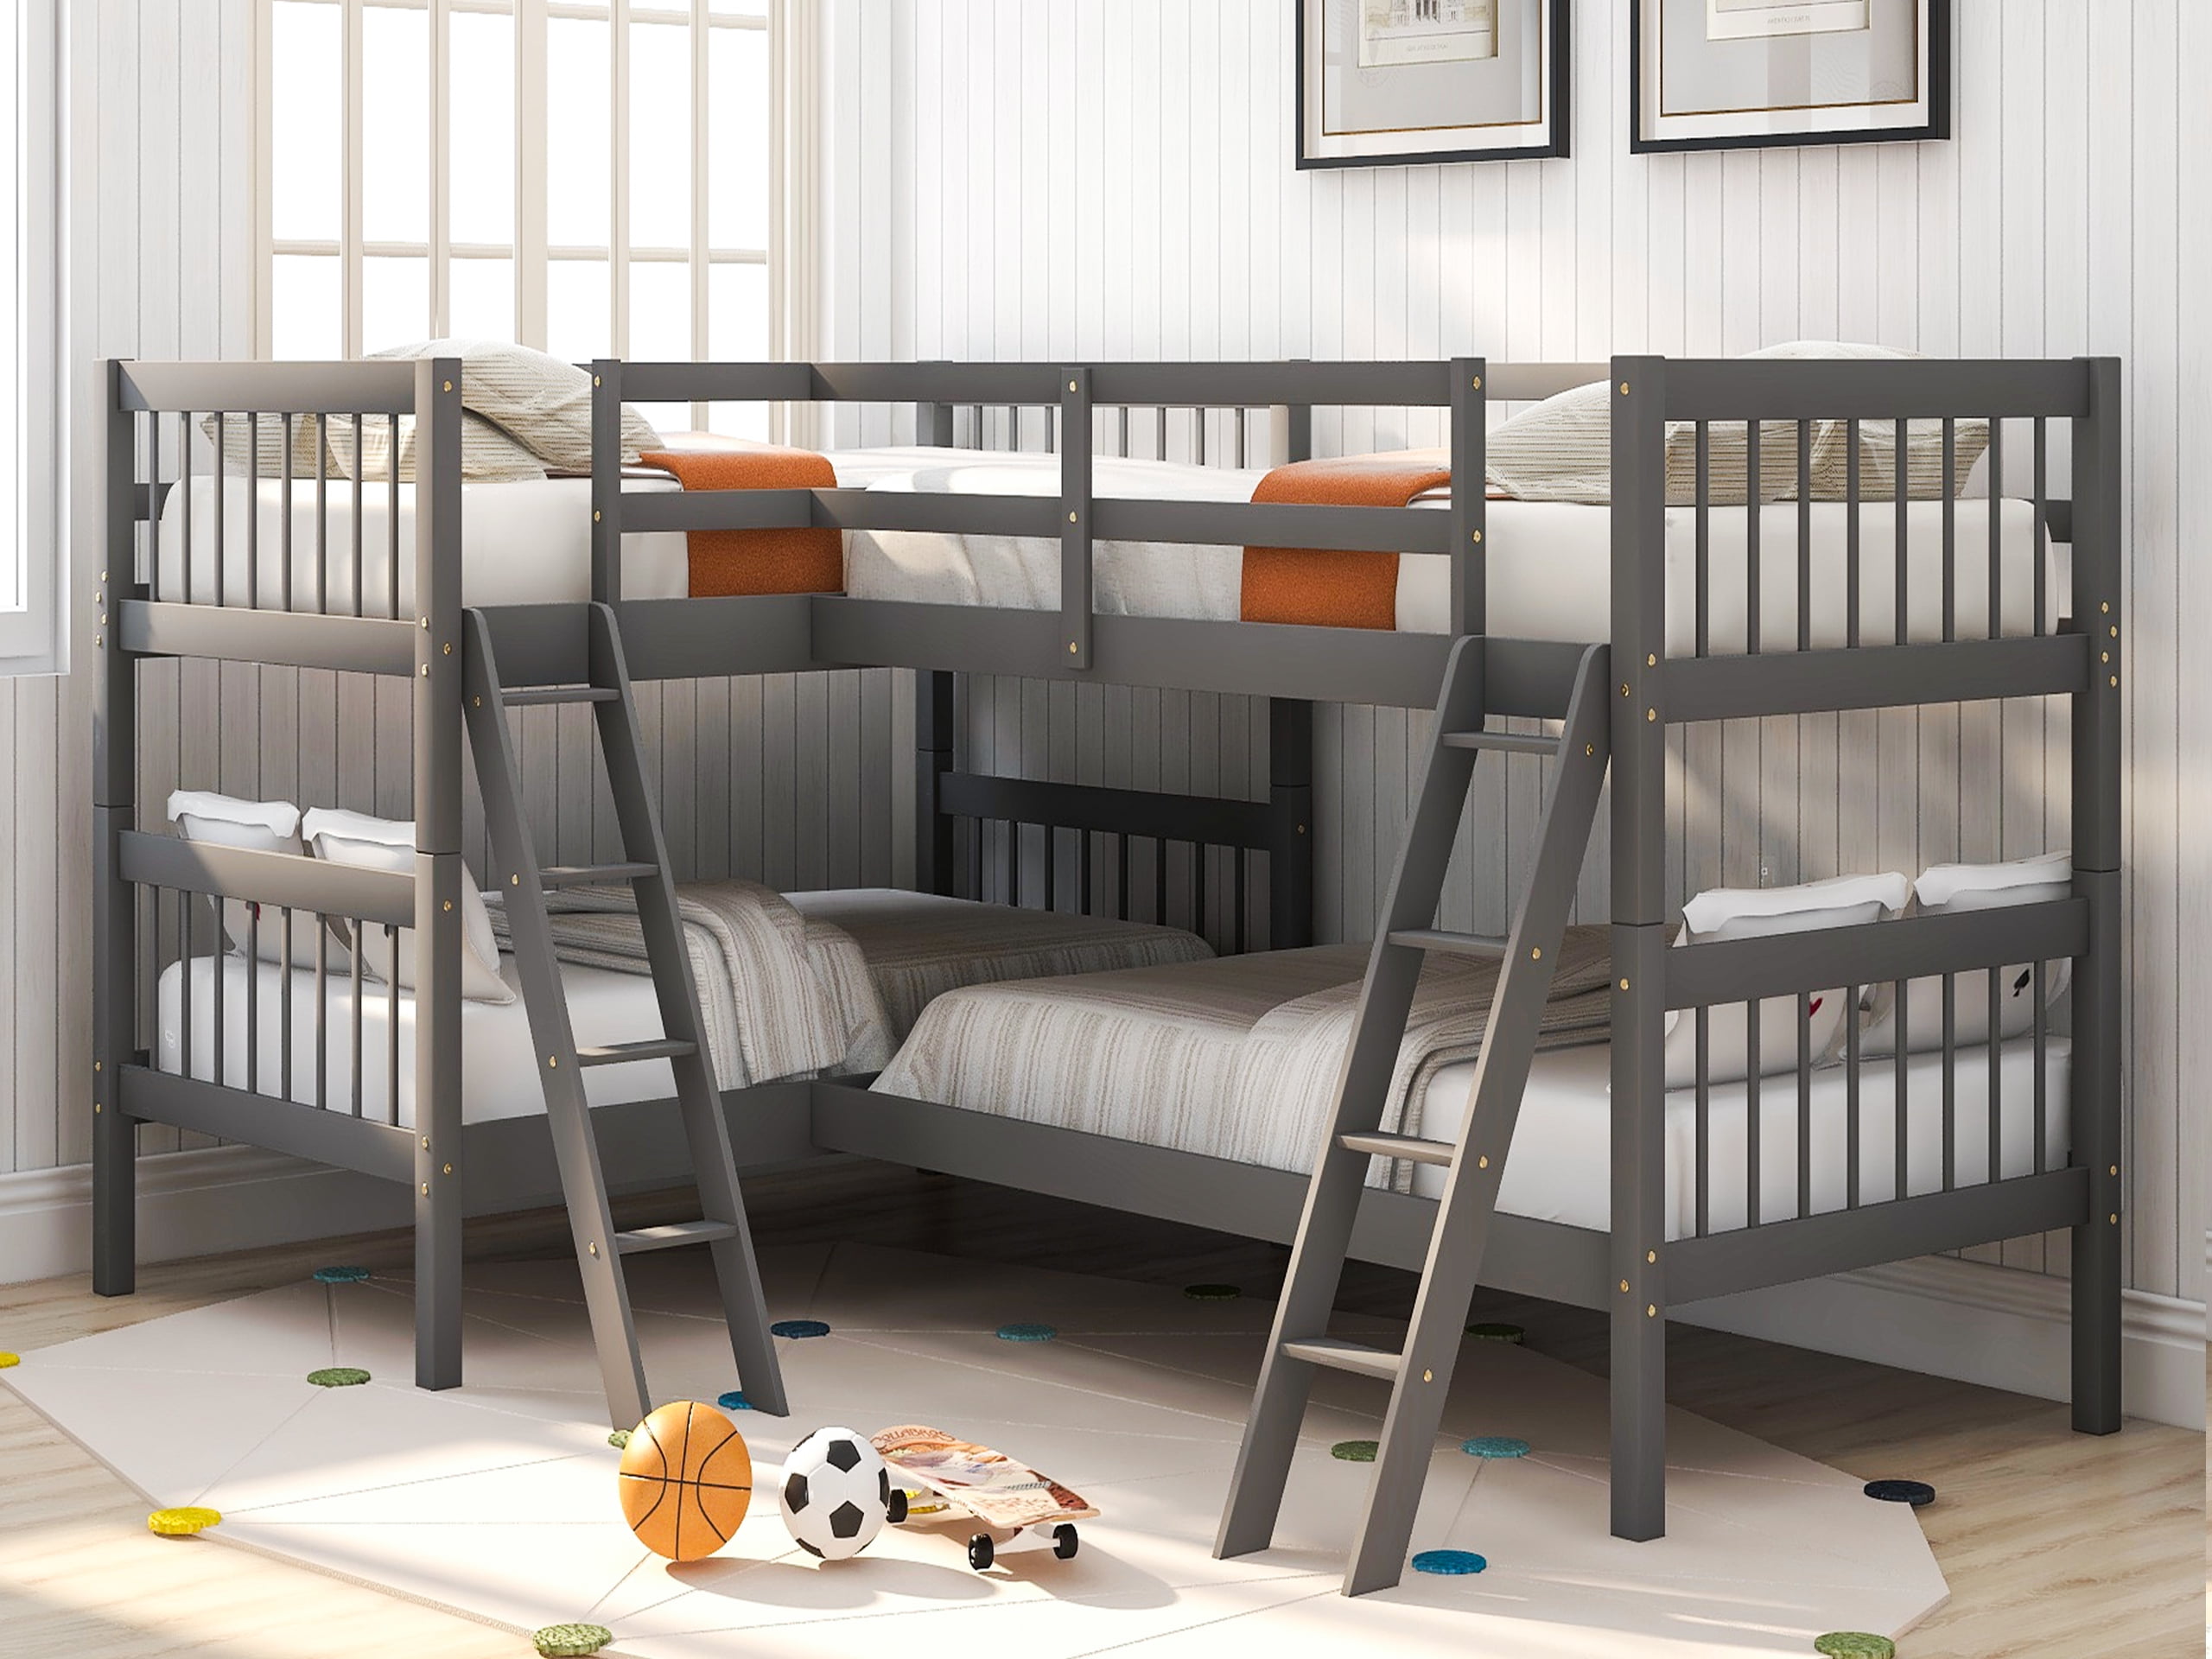 L Shaped Bunk Bed Twin Size Four Kids, Room With 2 Bunk Beds